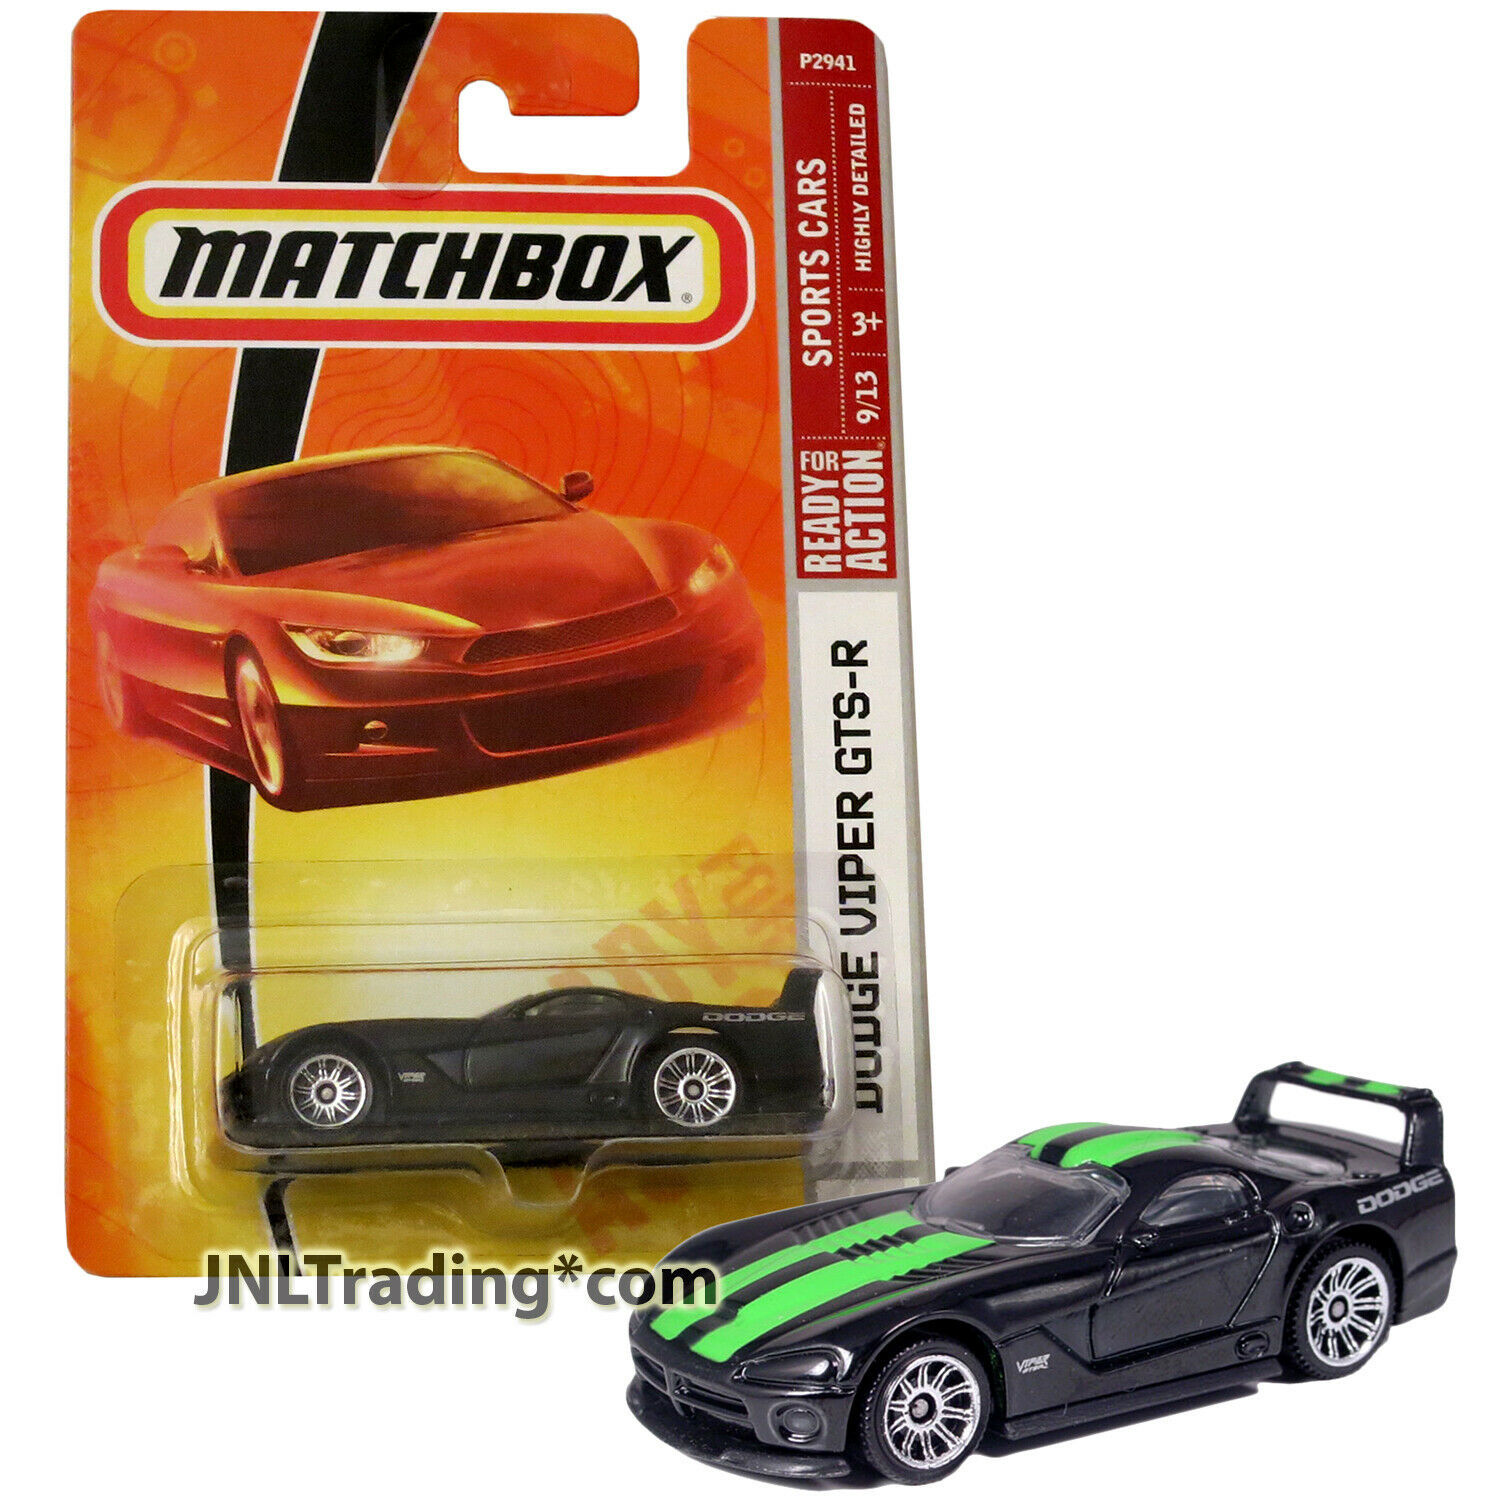 Primary image for Year 2008 Matchbox Sports Cars 1:64 Die Cast Car #22 - Black DODGE VIPER GTS-R